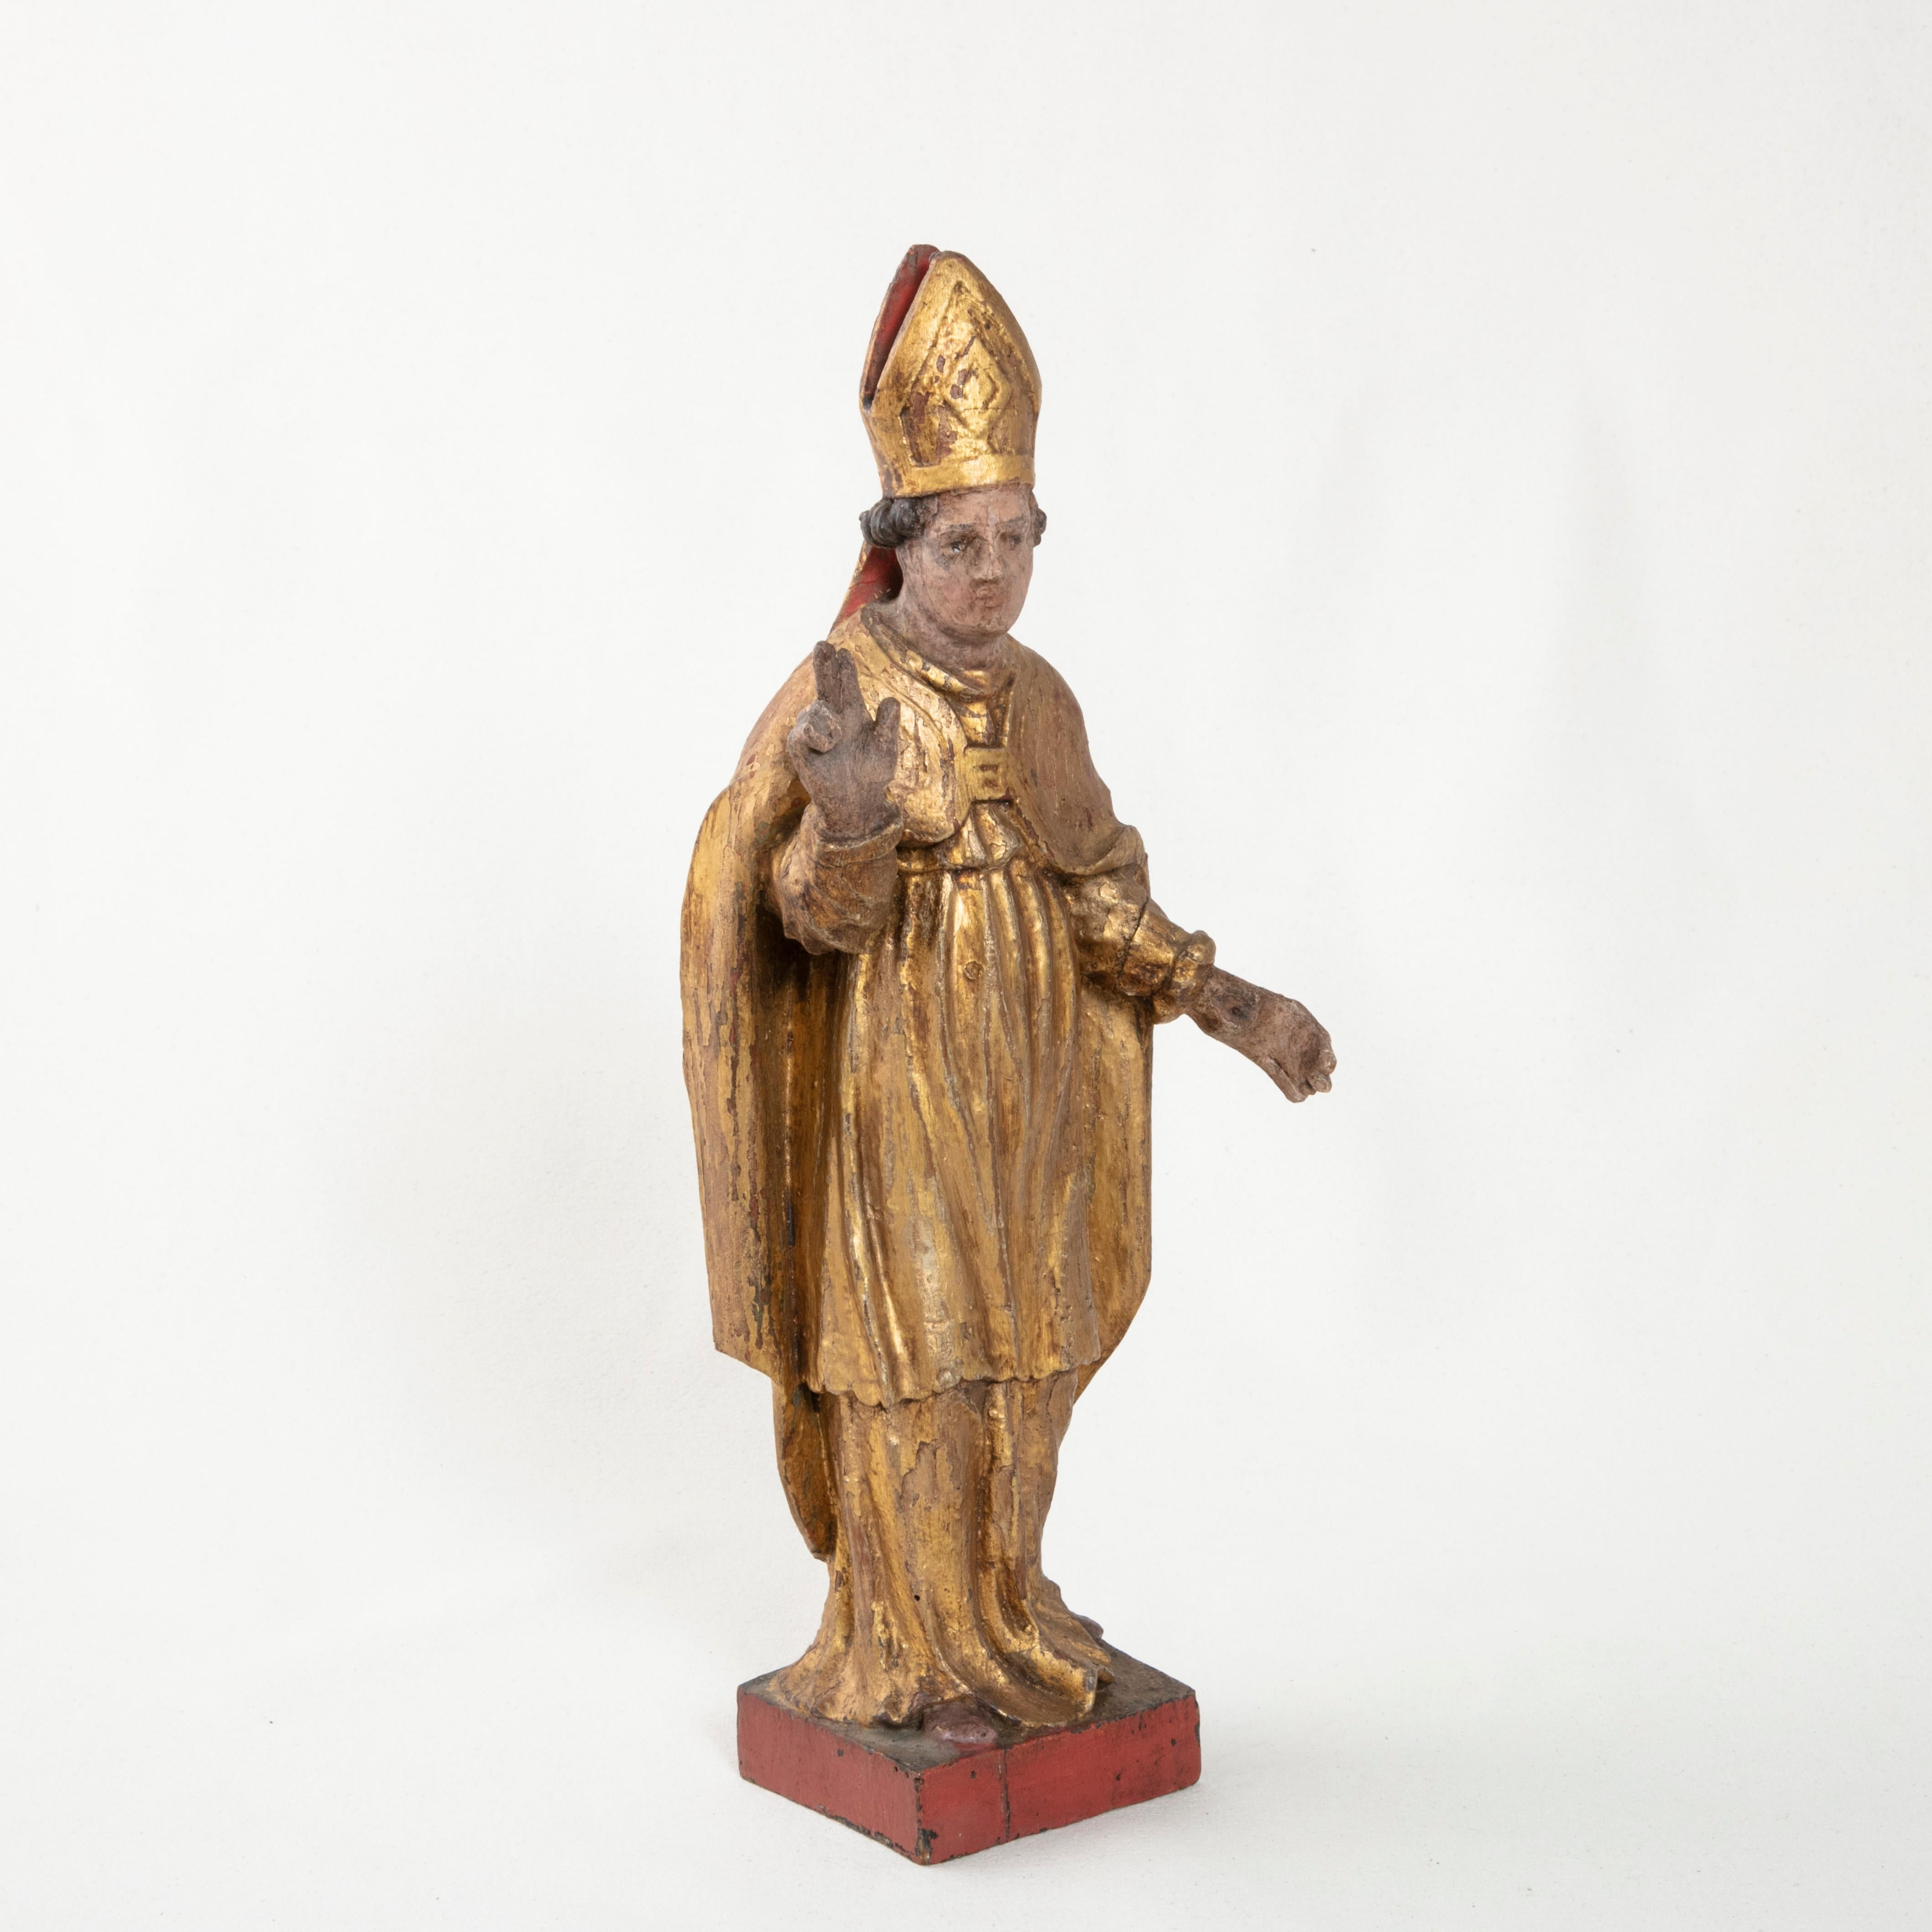 This late 18th century French hand carved giltwood polychrome statue is of a bishop dressed in golden robes. On top of his head rests a typical bishop's gold mitre hat with a red underside. His right hand is held outstretched to offer benediction.